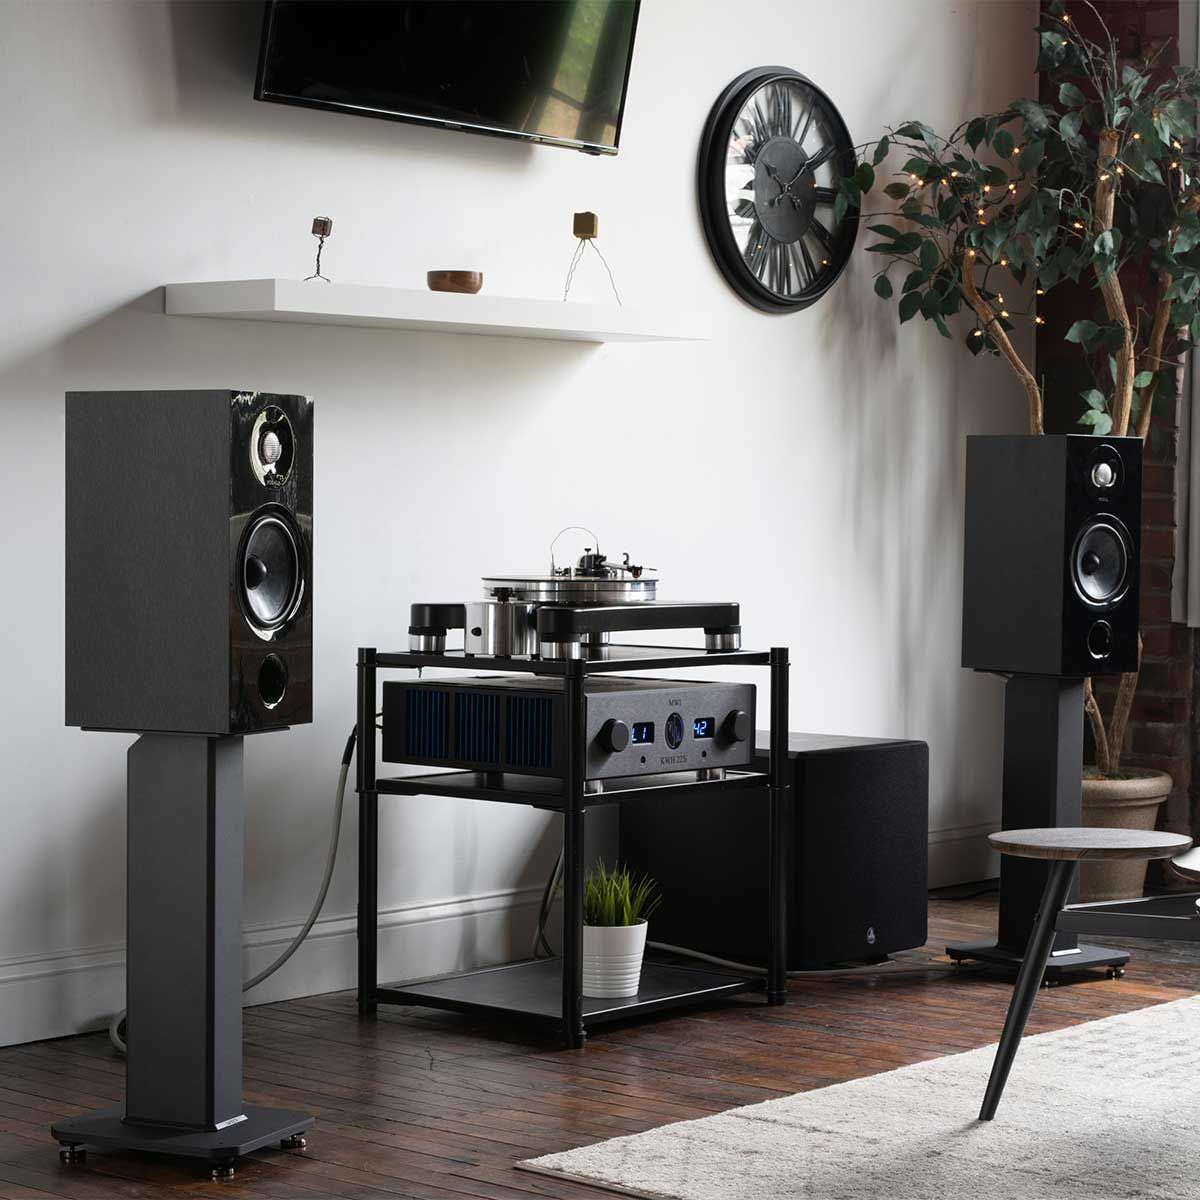 Kanto SX Speaker Stands, Black, set up with large bookshelf speakers in a home audio room